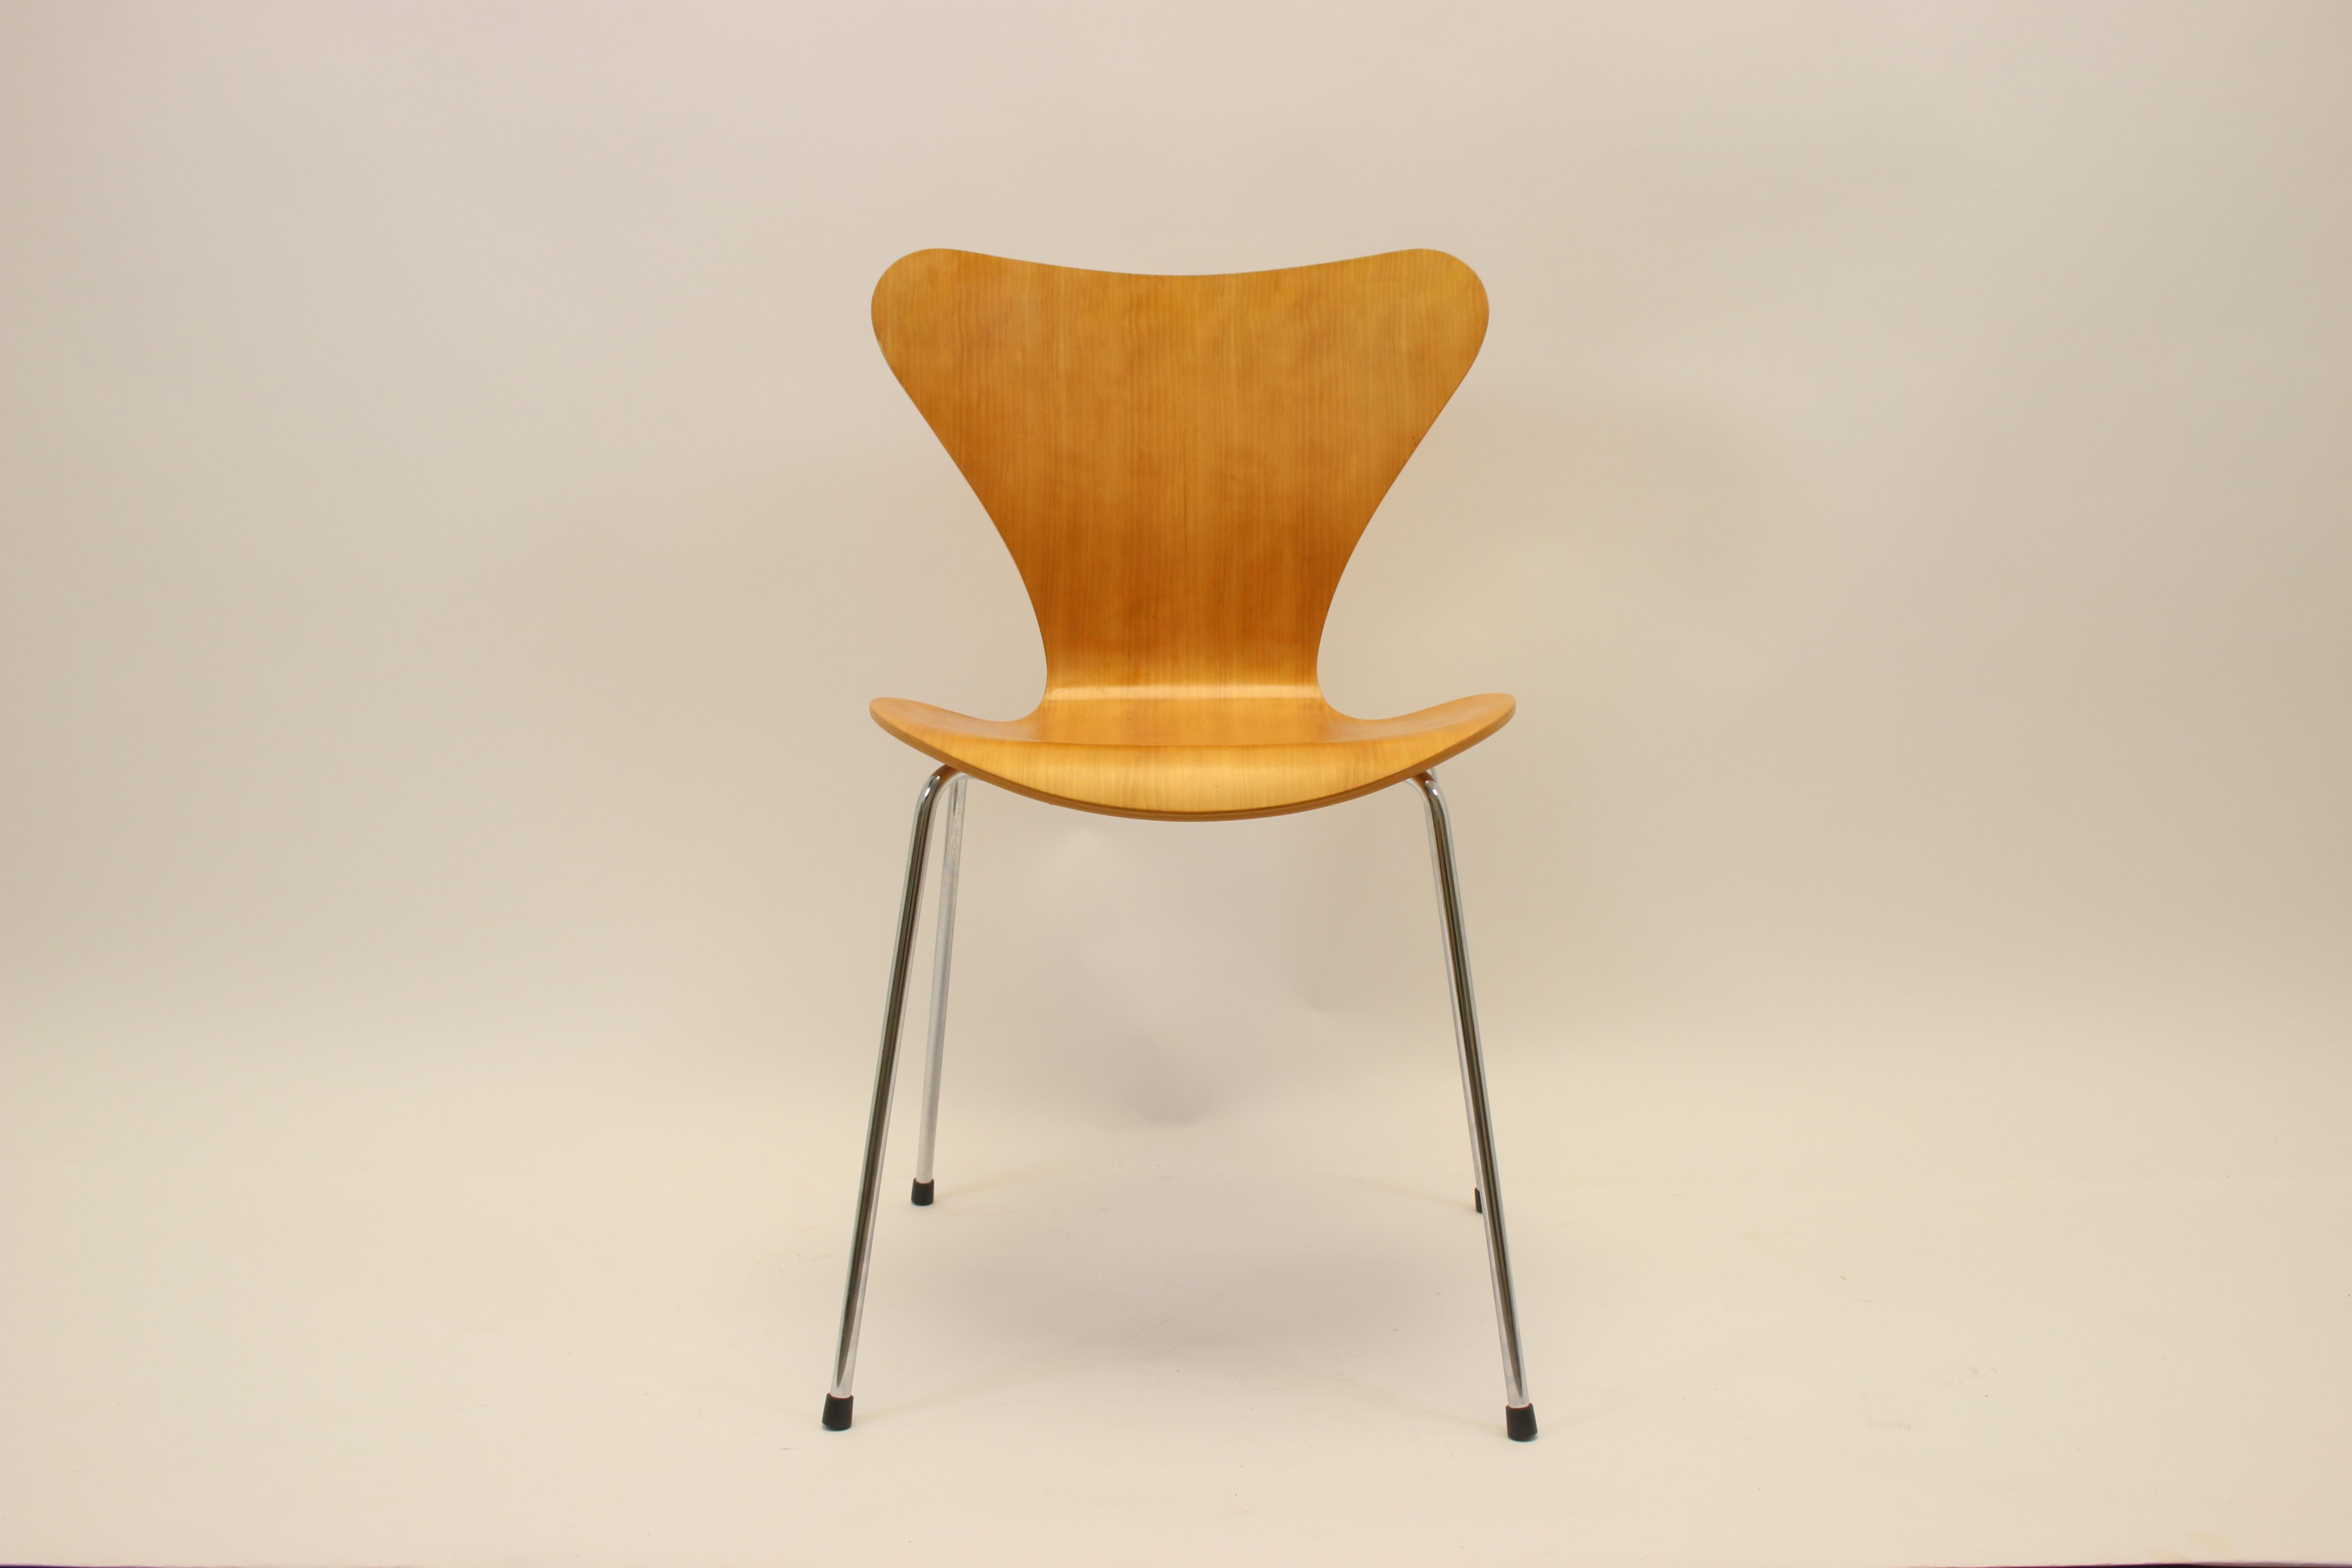 The butterfly chair 3107 is a design by Arne Jacobsen from 1953 and is also called 'Series 7'. The chair is one of the most successful chairs ever. The popularity of Arne Jacobsen's butterfly chair seems unbeatable even today.

The main reason for